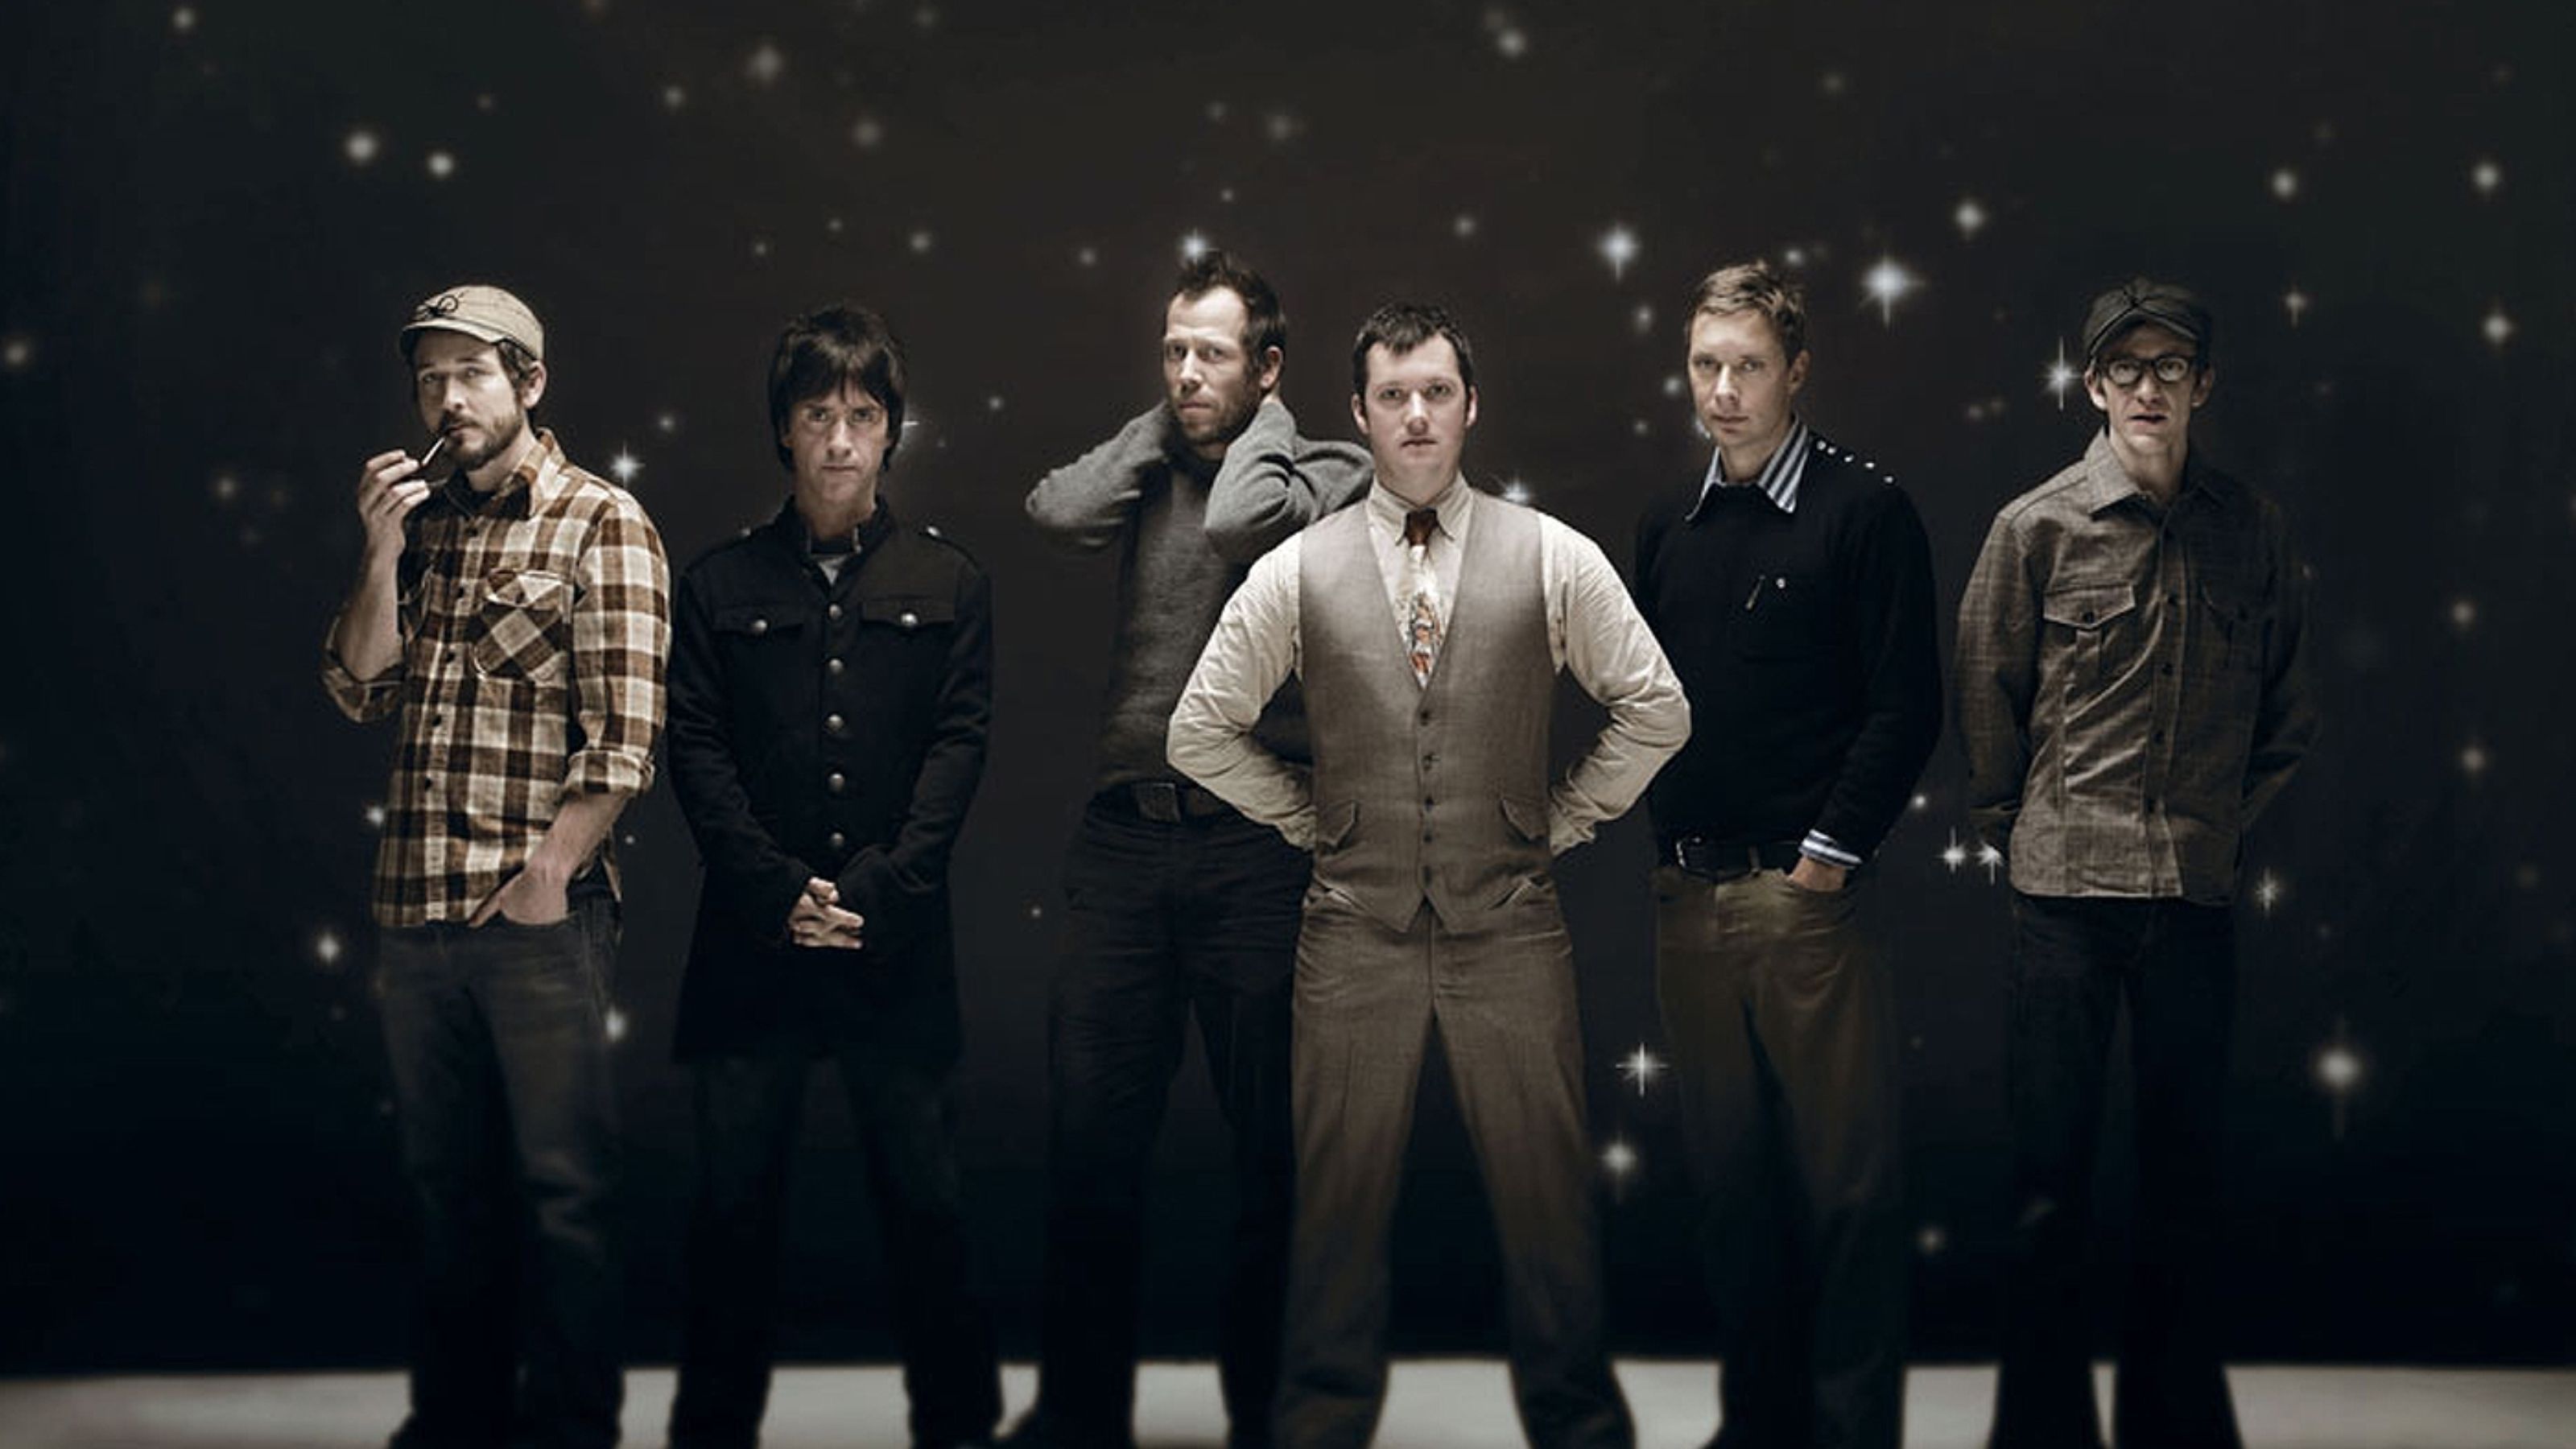 Modest Mouse wallpapers, Music, HQ Modest Mouse pictures.